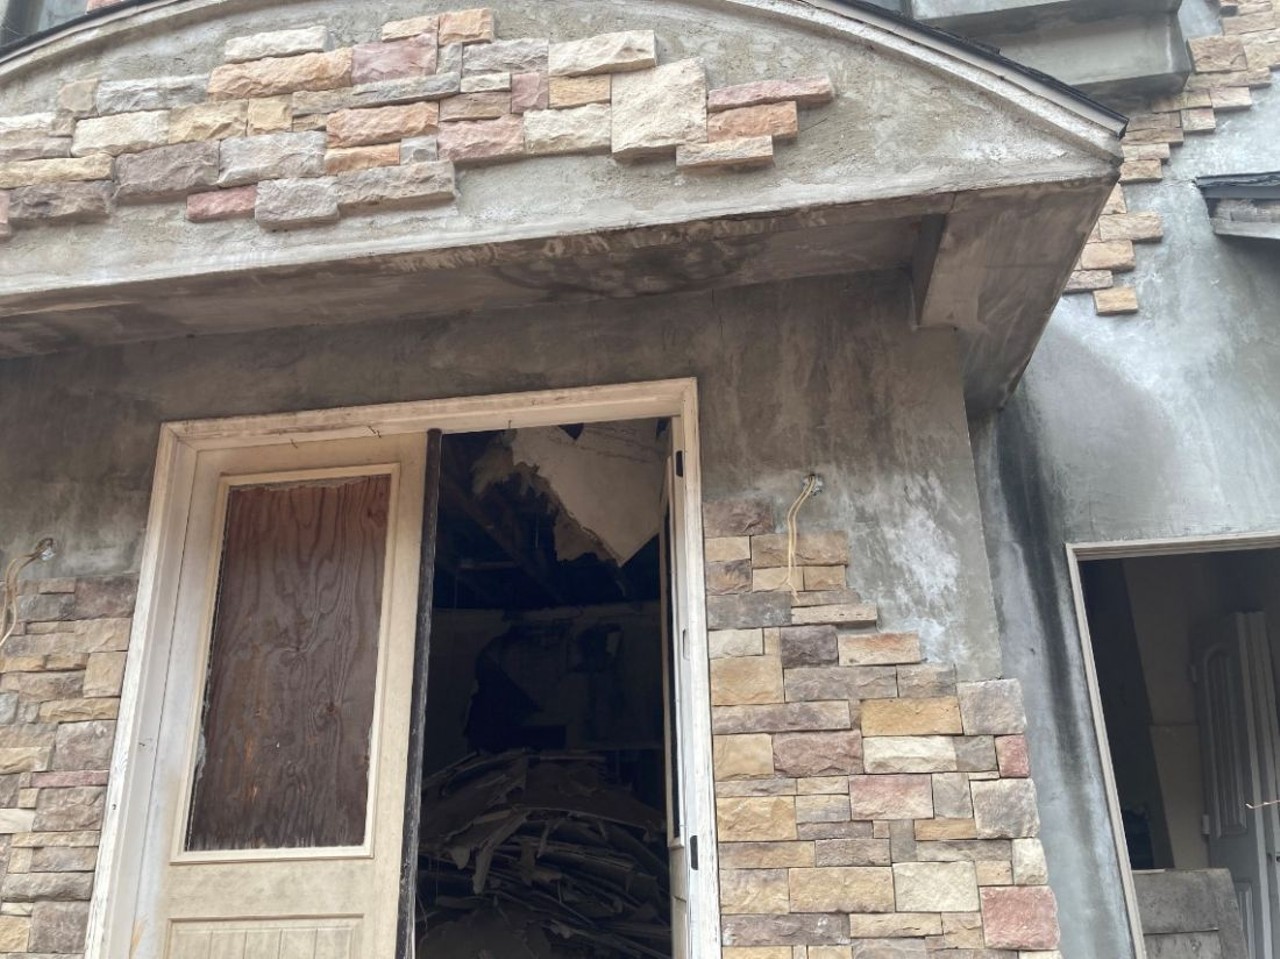 These Abandoned Mansions in Branson Are Going Viral on TikTok [PHOTOS]